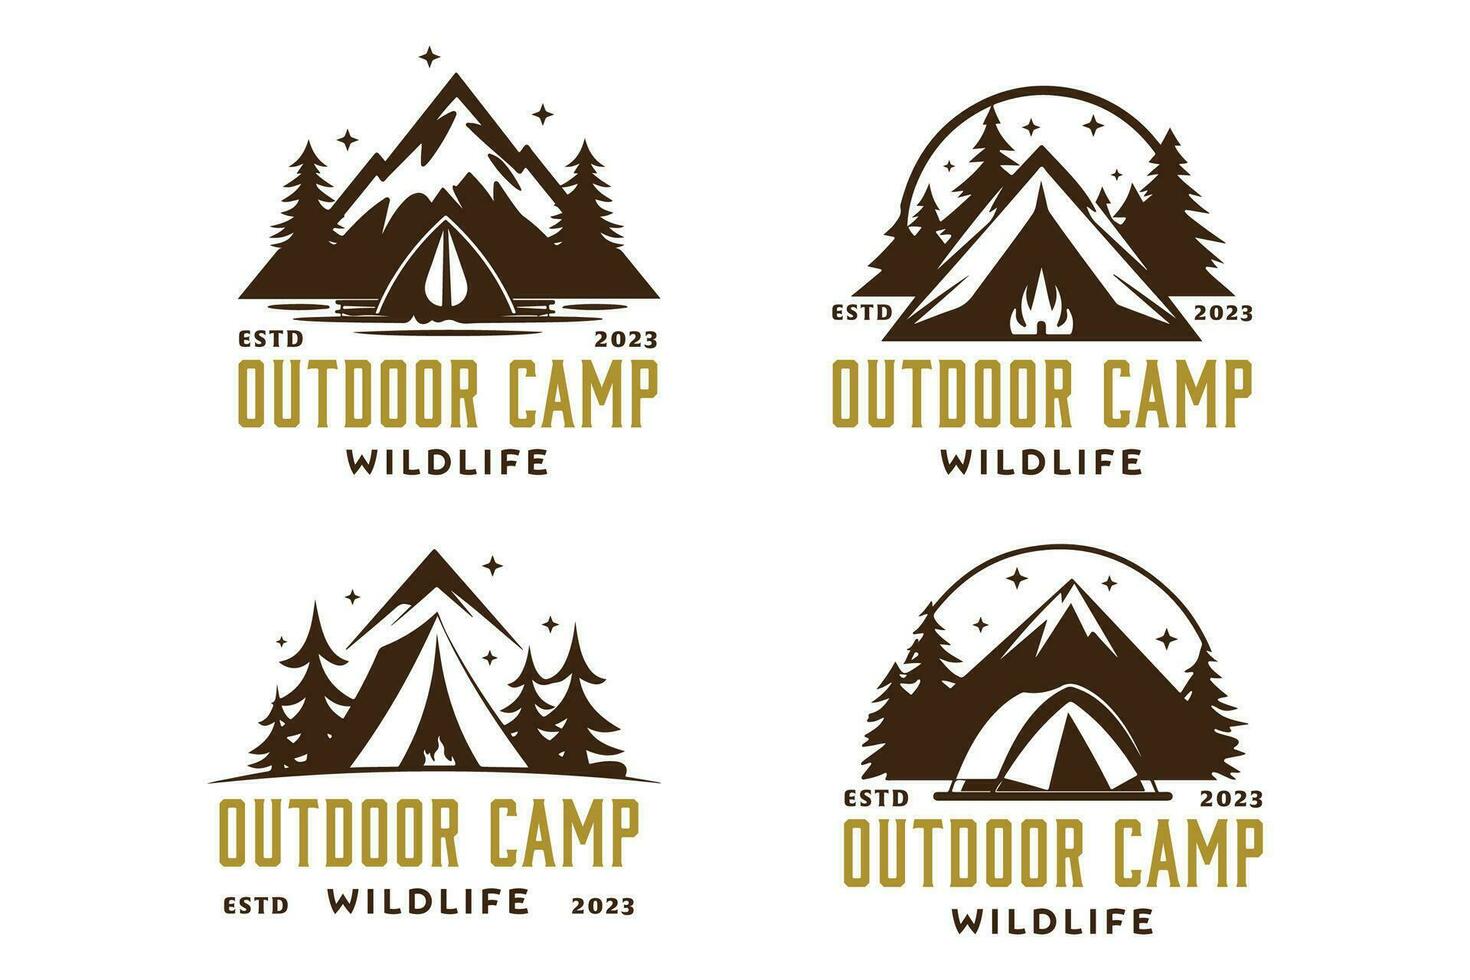 Outdoor Camp Badges Vector refers to a set of vector graphics that depict camp-themed badges suitable for outdoor activities and adventure-related designs.